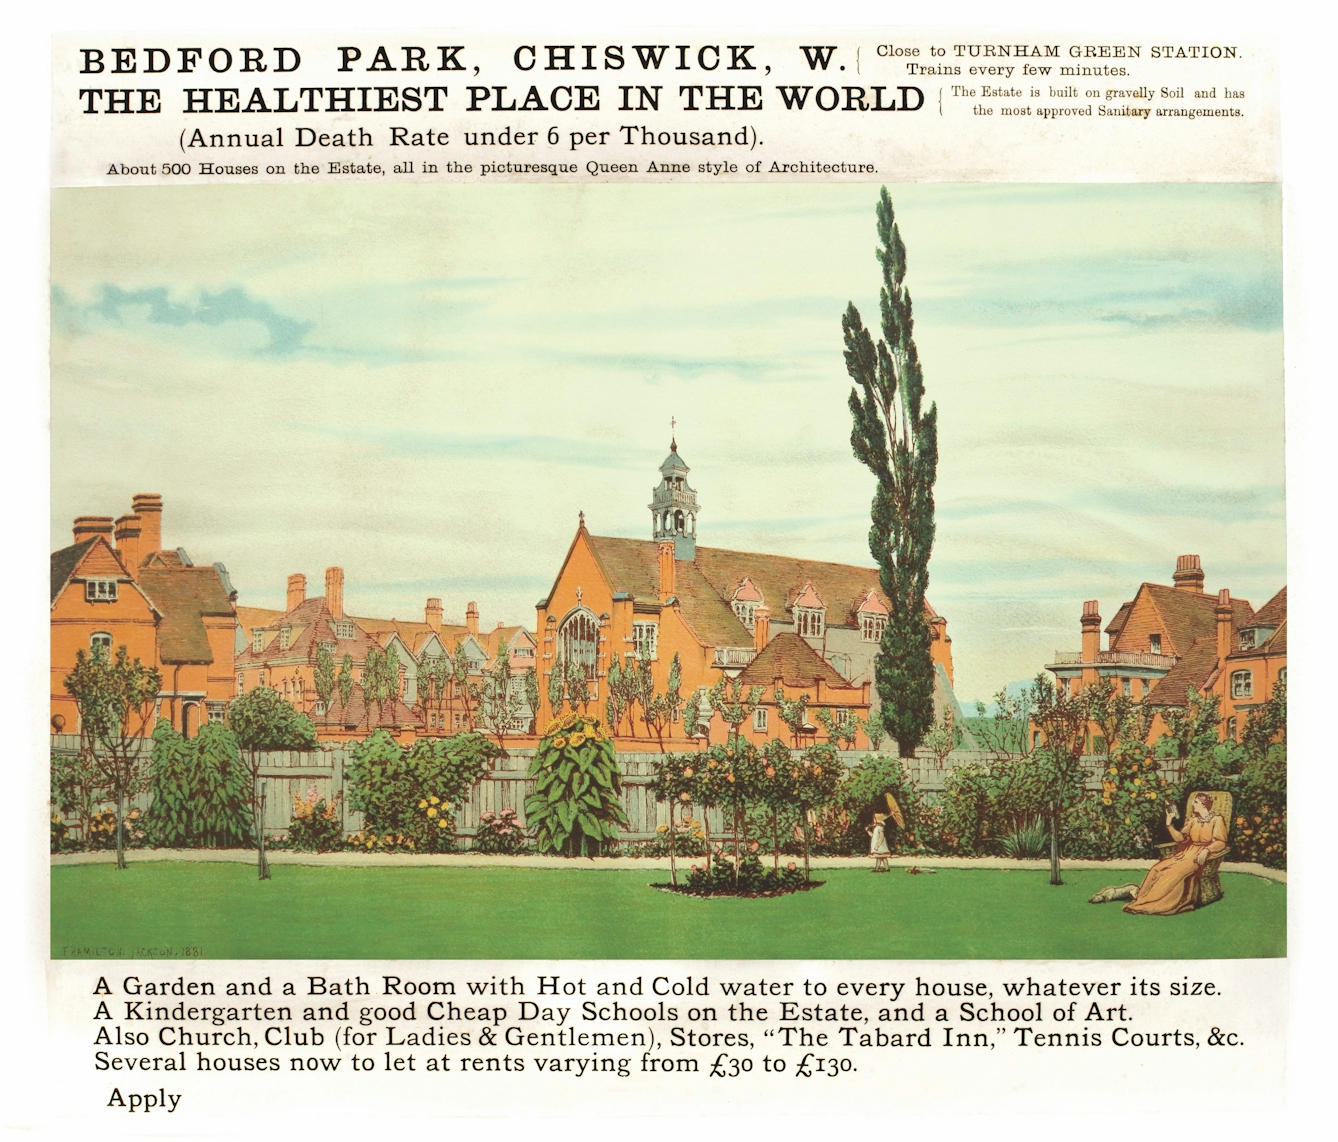 An advertisement for Bedford Park, in Chiswick, west London. The copy reads: 'The Healthiest Place in the World (Annual Death Rate under 6 per Thousand). About 500 Houses on the Estate, all in the picturesque Queen Anne style of Architecture. The estate is built on gravelly Soil and has the most approved Sanitary arrangements.'  Underneath a picture of the estate with red brick houses, leafy gardens, a women luxuriating on a chair and a young child walking around with a parasol, the copy reads: 'A Garden and a Bath Room with Hot and Cold water to every house, whatever its size. A Kindergarten and good Cheap Day Schools on the Estate, and a School of Art. Also Church, Club (for Ladies and Gentlemen), Stores, the "Tabard Inn", Tennis Courts &c. Several houses now to let at rents from £30 to £130. Apply" 